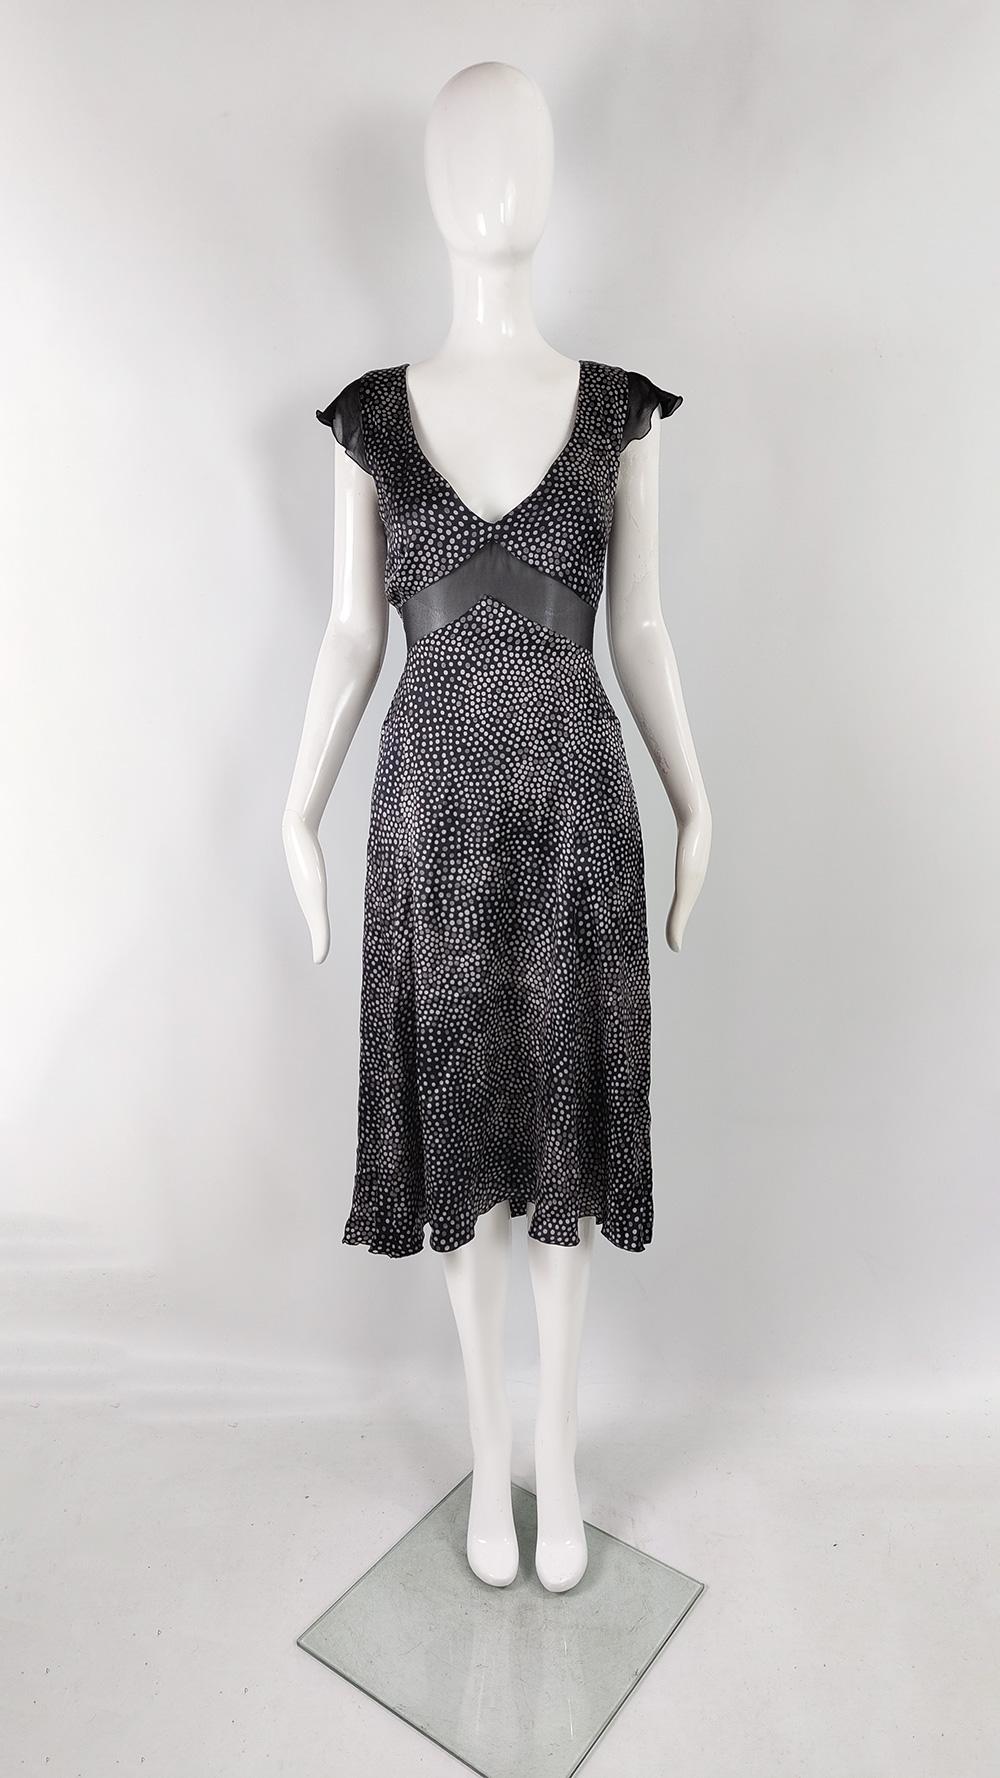 A fabulous vintage womens evening / party dress from the A/W 2004 collection by luxury Italian fashion house, Emporio Armani, designed by Giorgio Armani. As seen on the runway, this stunning dress is in a pure, bias cut silk satin with a polka dot